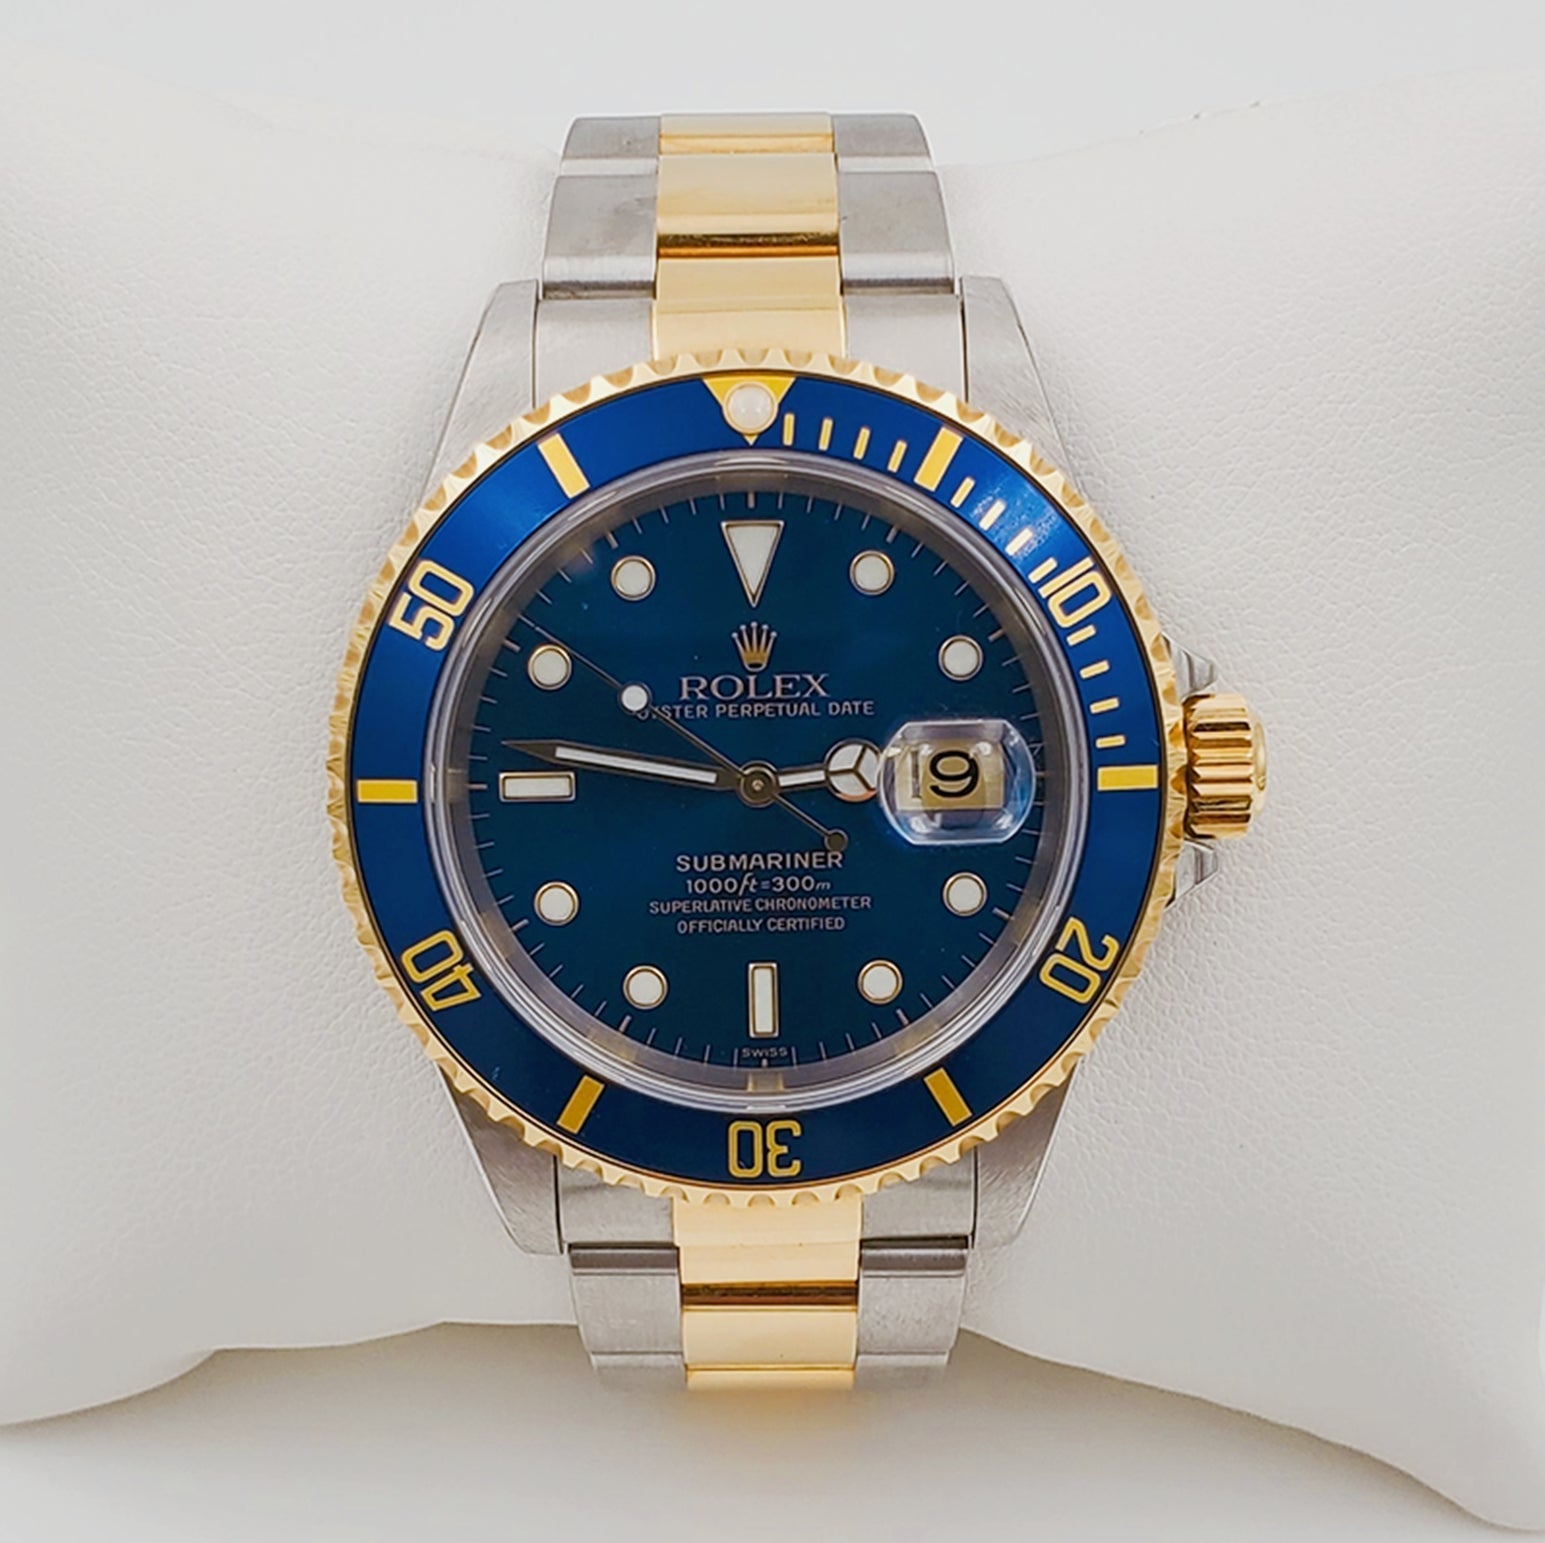 1999 Men's Rolex 40mm Submariner Oyster Perpetual Two Tone 18K Yellow Gold / Stainless Steel Wristwatch w/ Blue Dial & Blue Bezel. (Pre-Owned 16613)